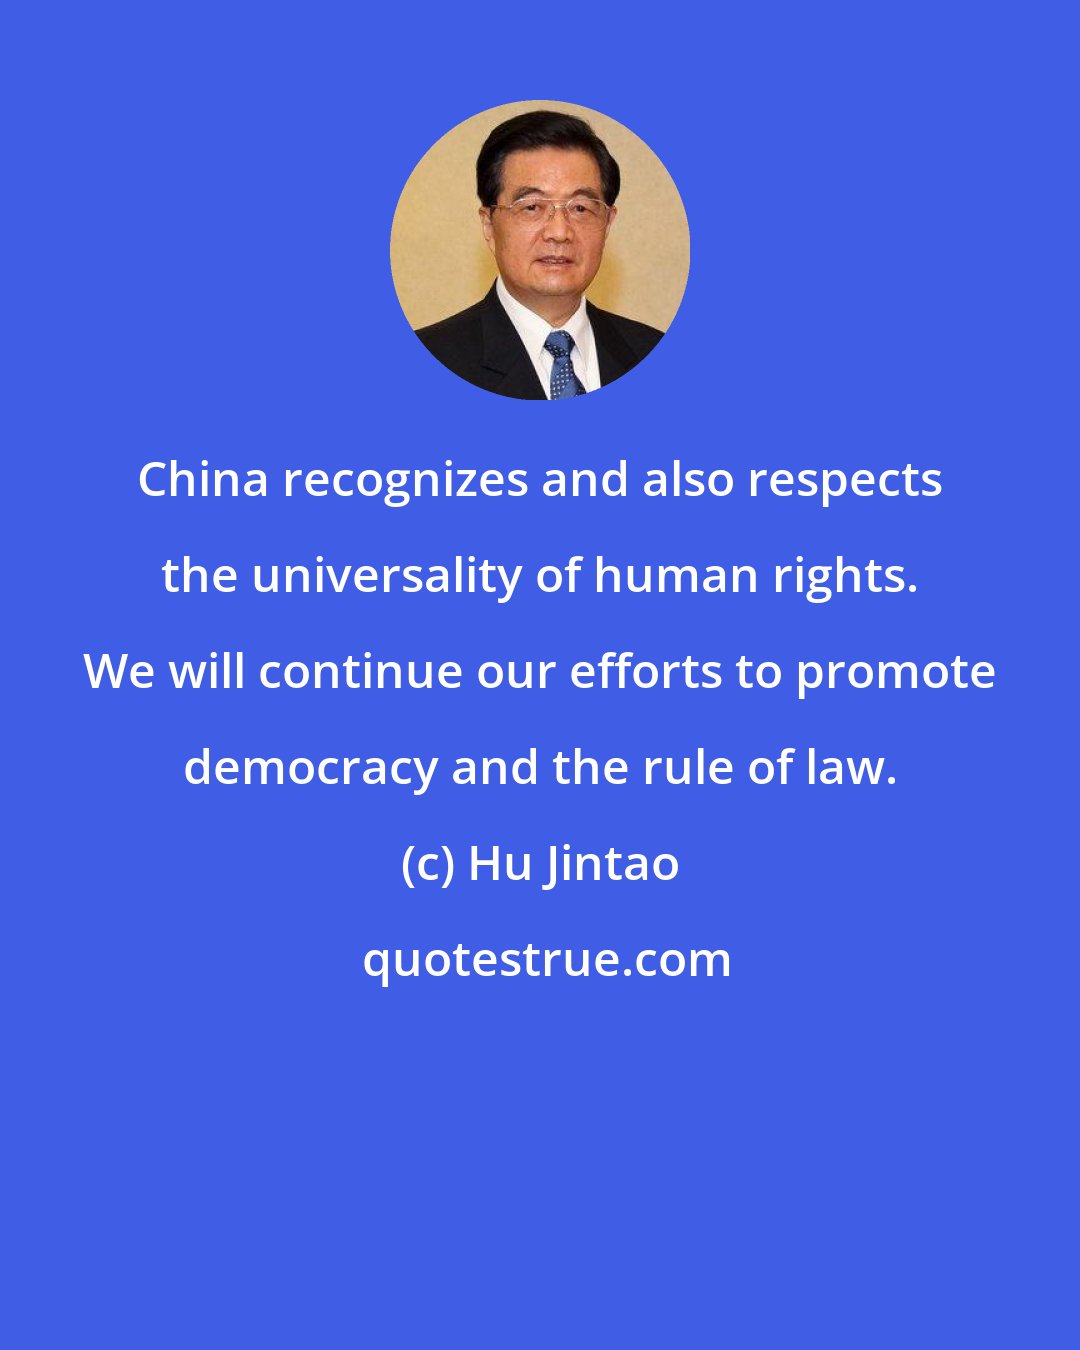 Hu Jintao: China recognizes and also respects the universality of human rights. We will continue our efforts to promote democracy and the rule of law.